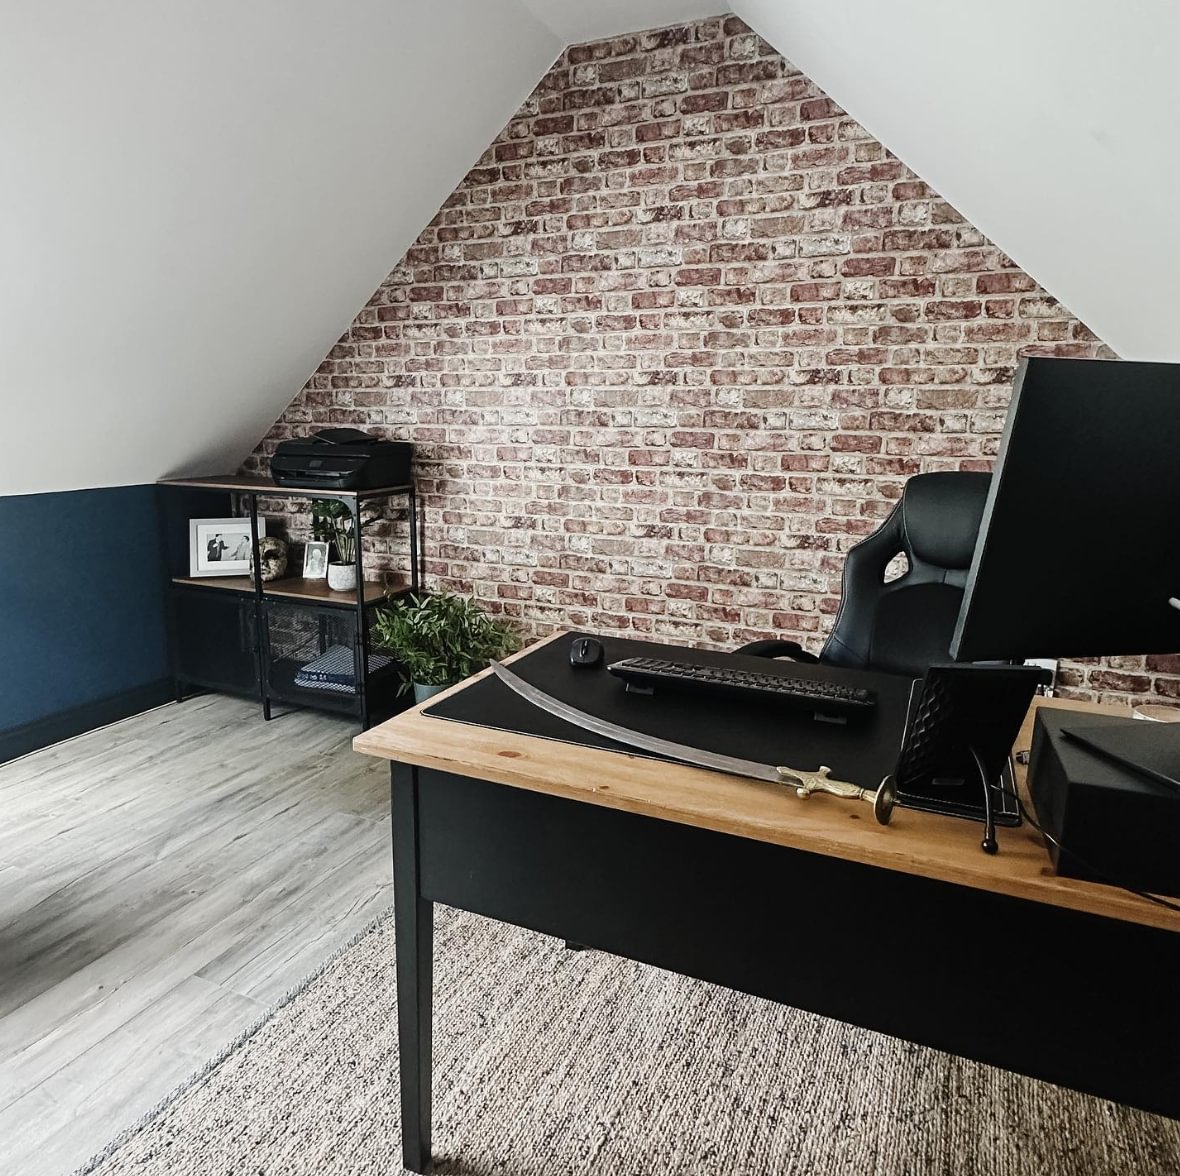 A home office with a brick feature wall and desk